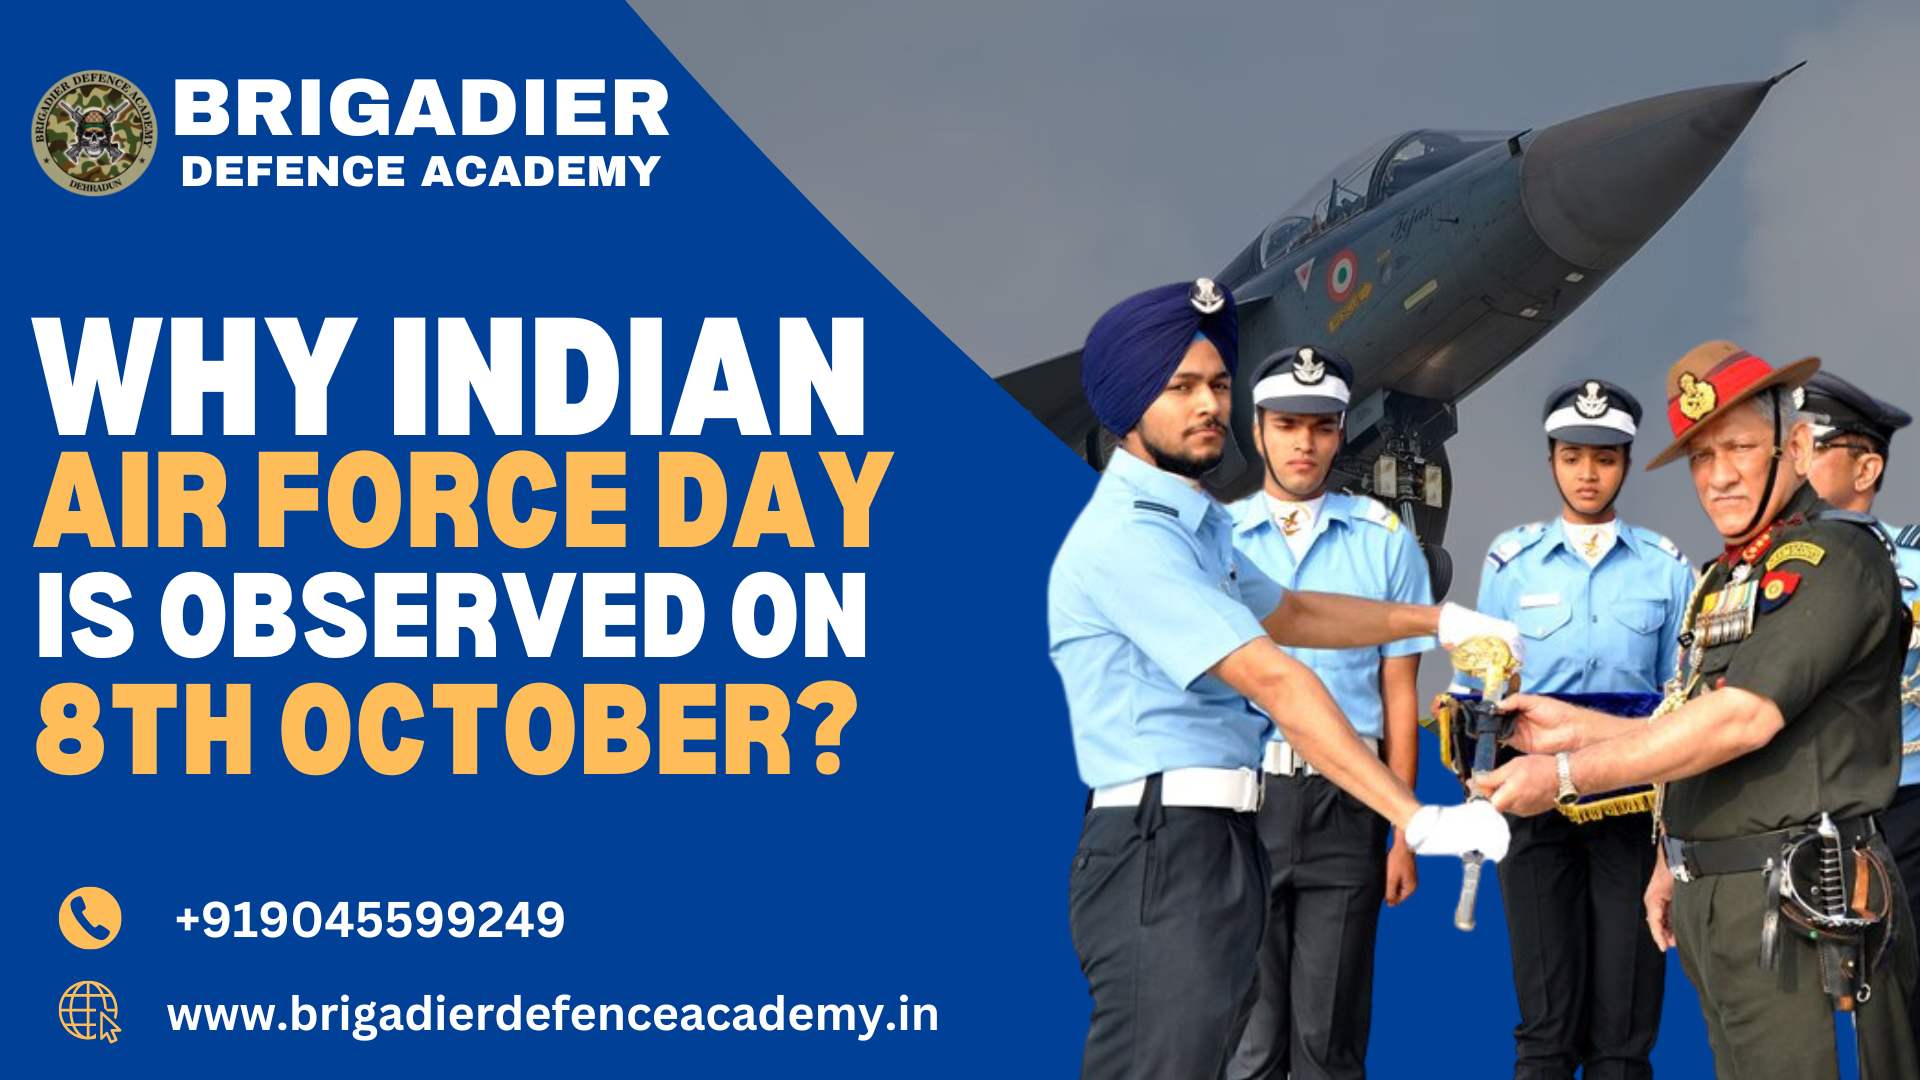 Why Indian Air Force Day is observed on 8th October?